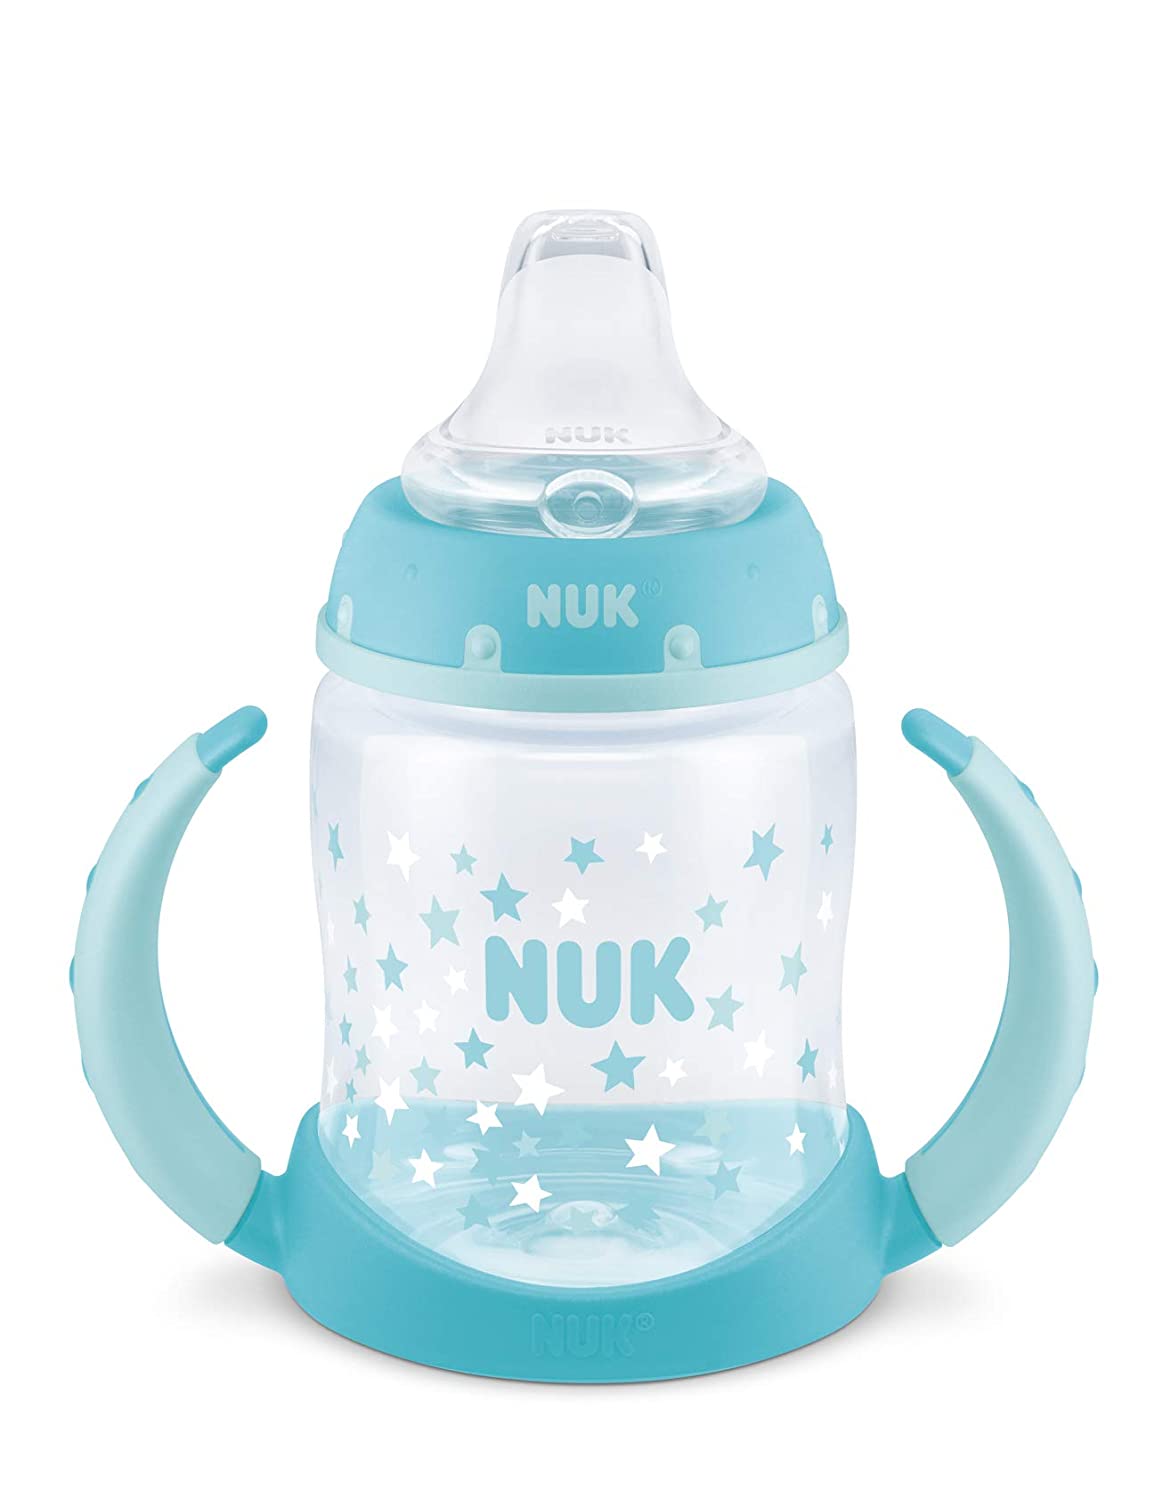 NUK Learner Sippy Cup, Stars, 5 Ounce (Pack of 1) $7.99 (REG $19.72)